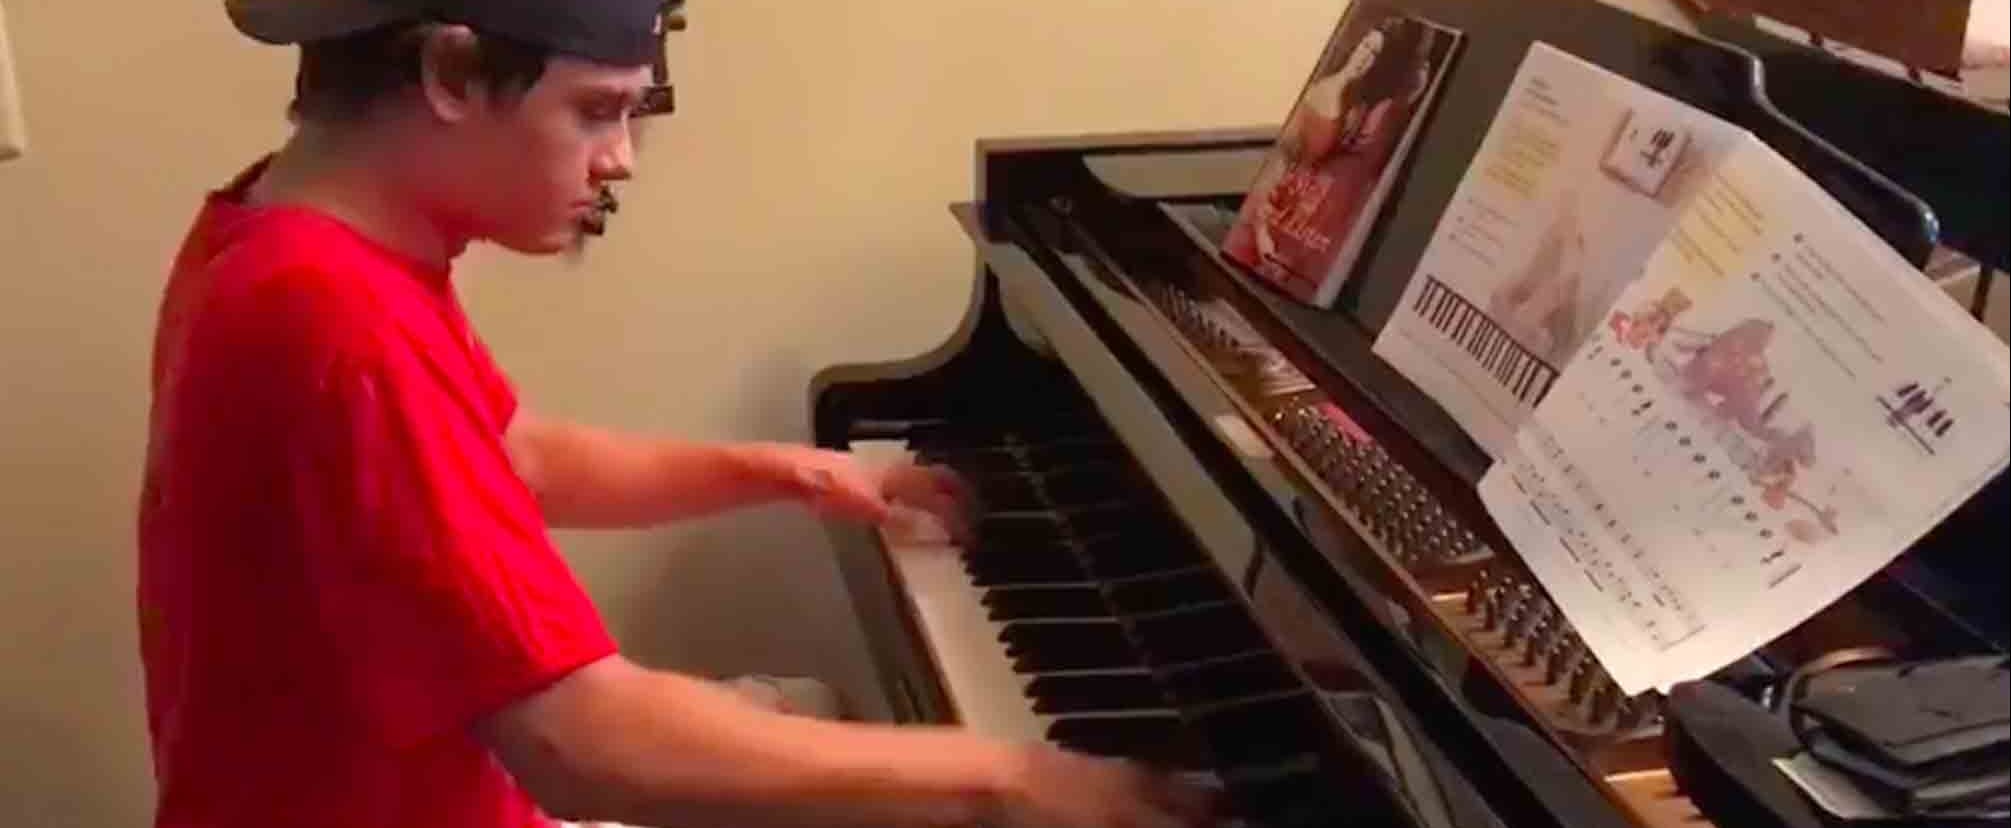 Ártico Perspicaz De nada Pizza Delivery Man Plays the Piano at a Family's House | POPSUGAR Family